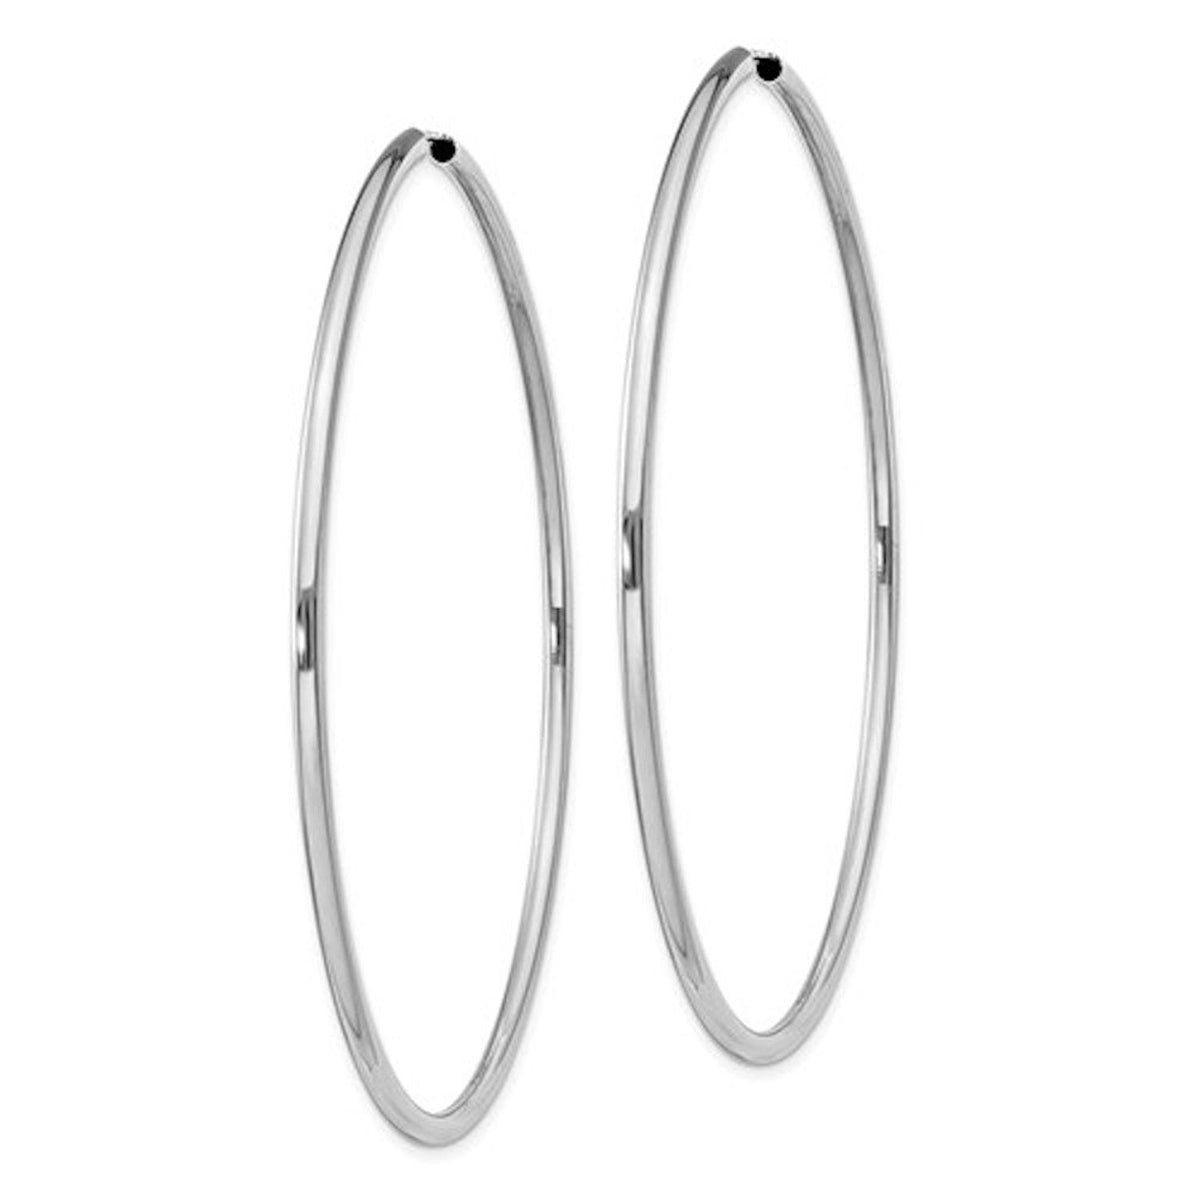 14k White Gold Round Endless Hoop Earrings 64mm x 2mm – BringJoyCollection